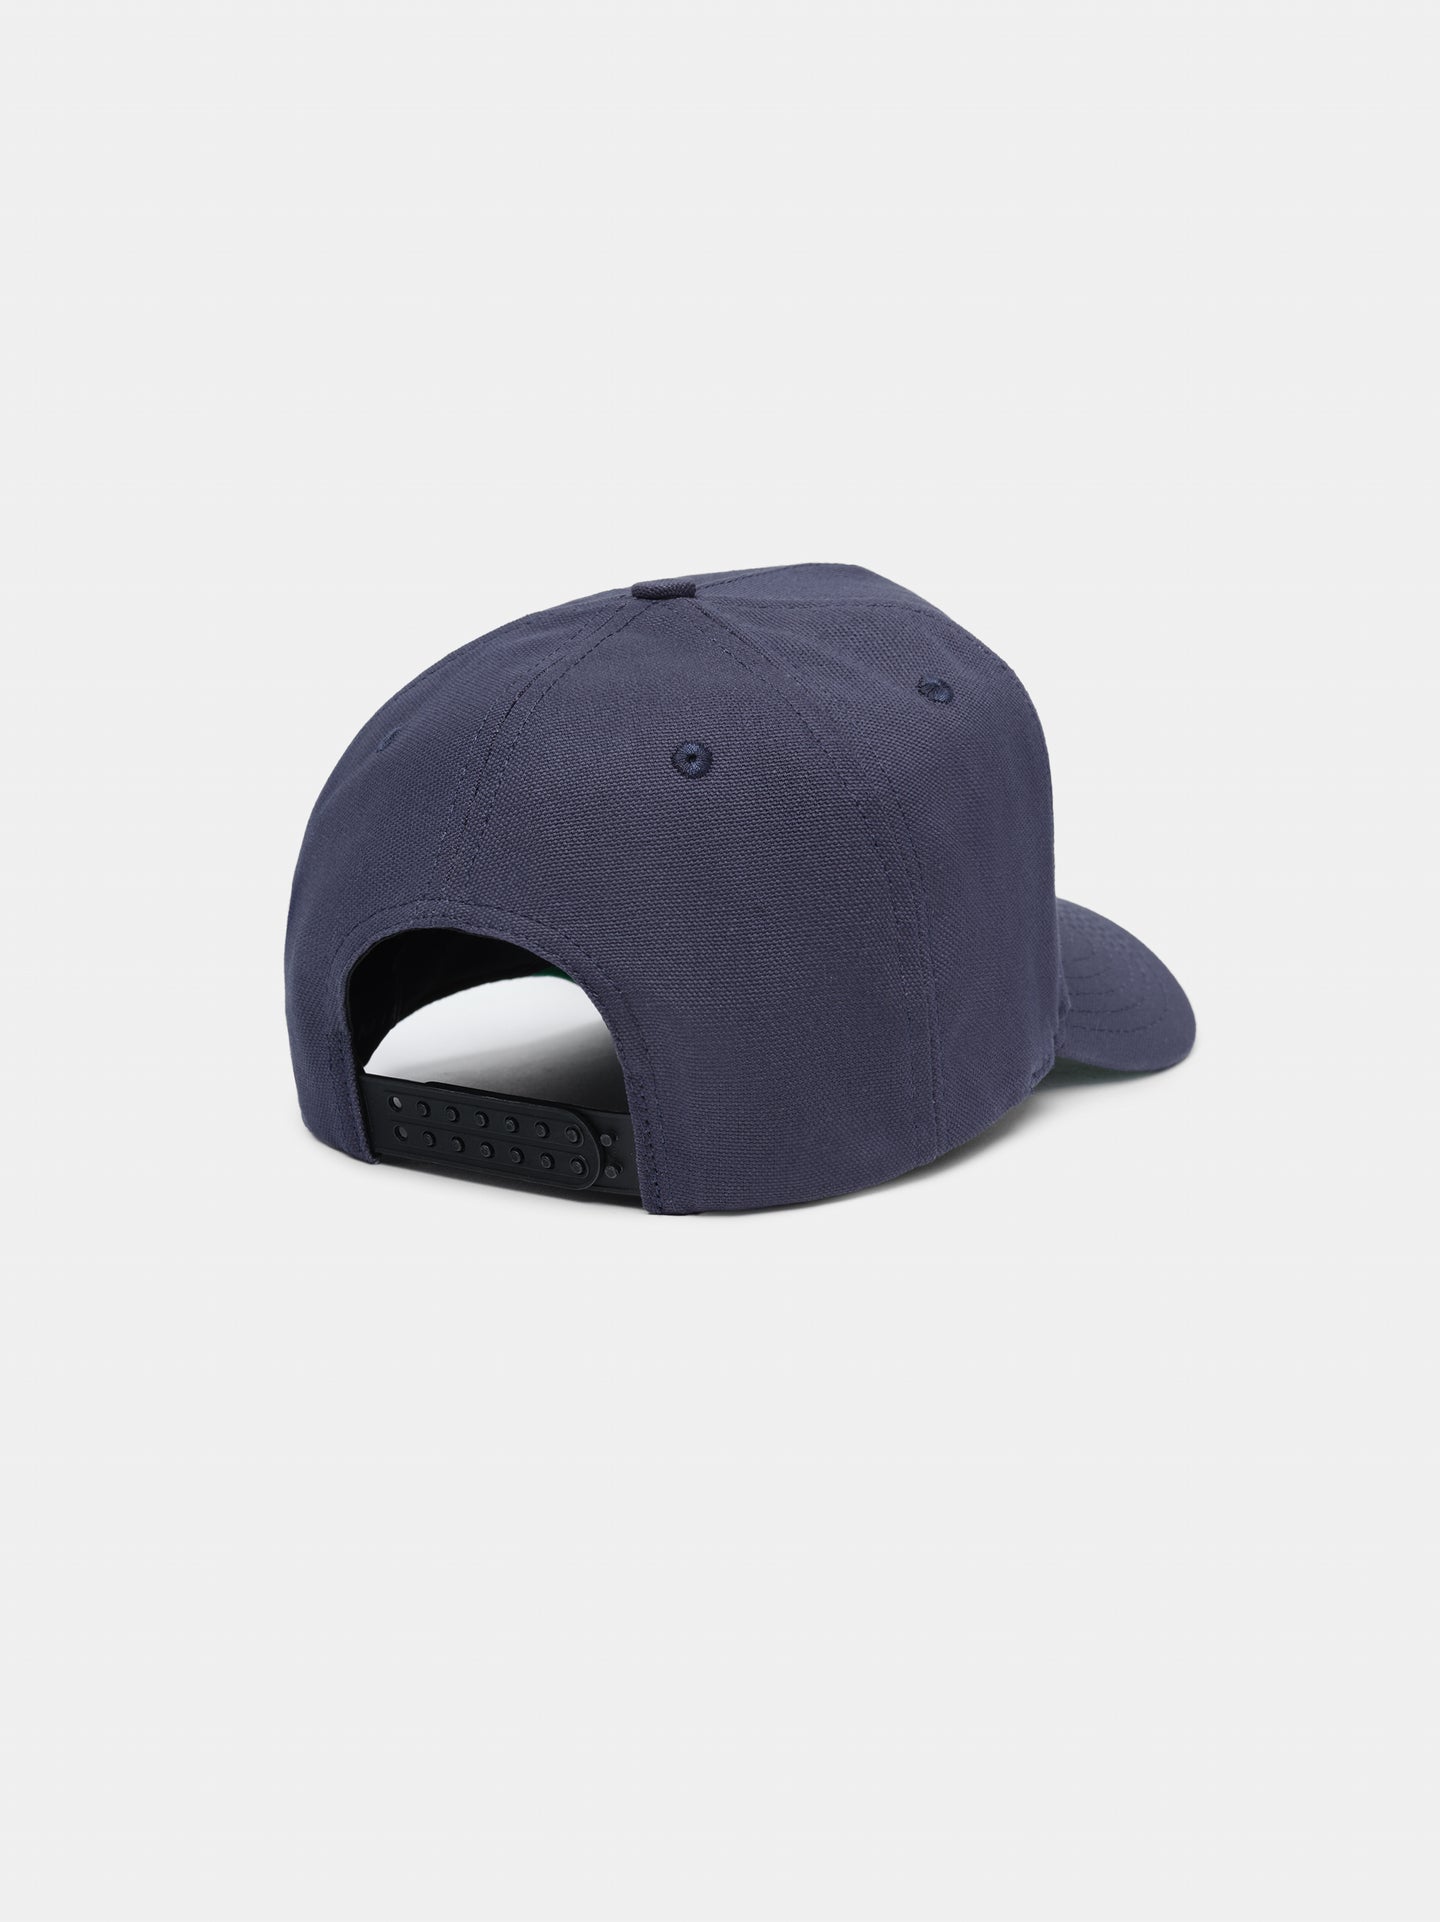 MA STAGGERED AMIRI FULL CANVAS HAT - Navy Off White